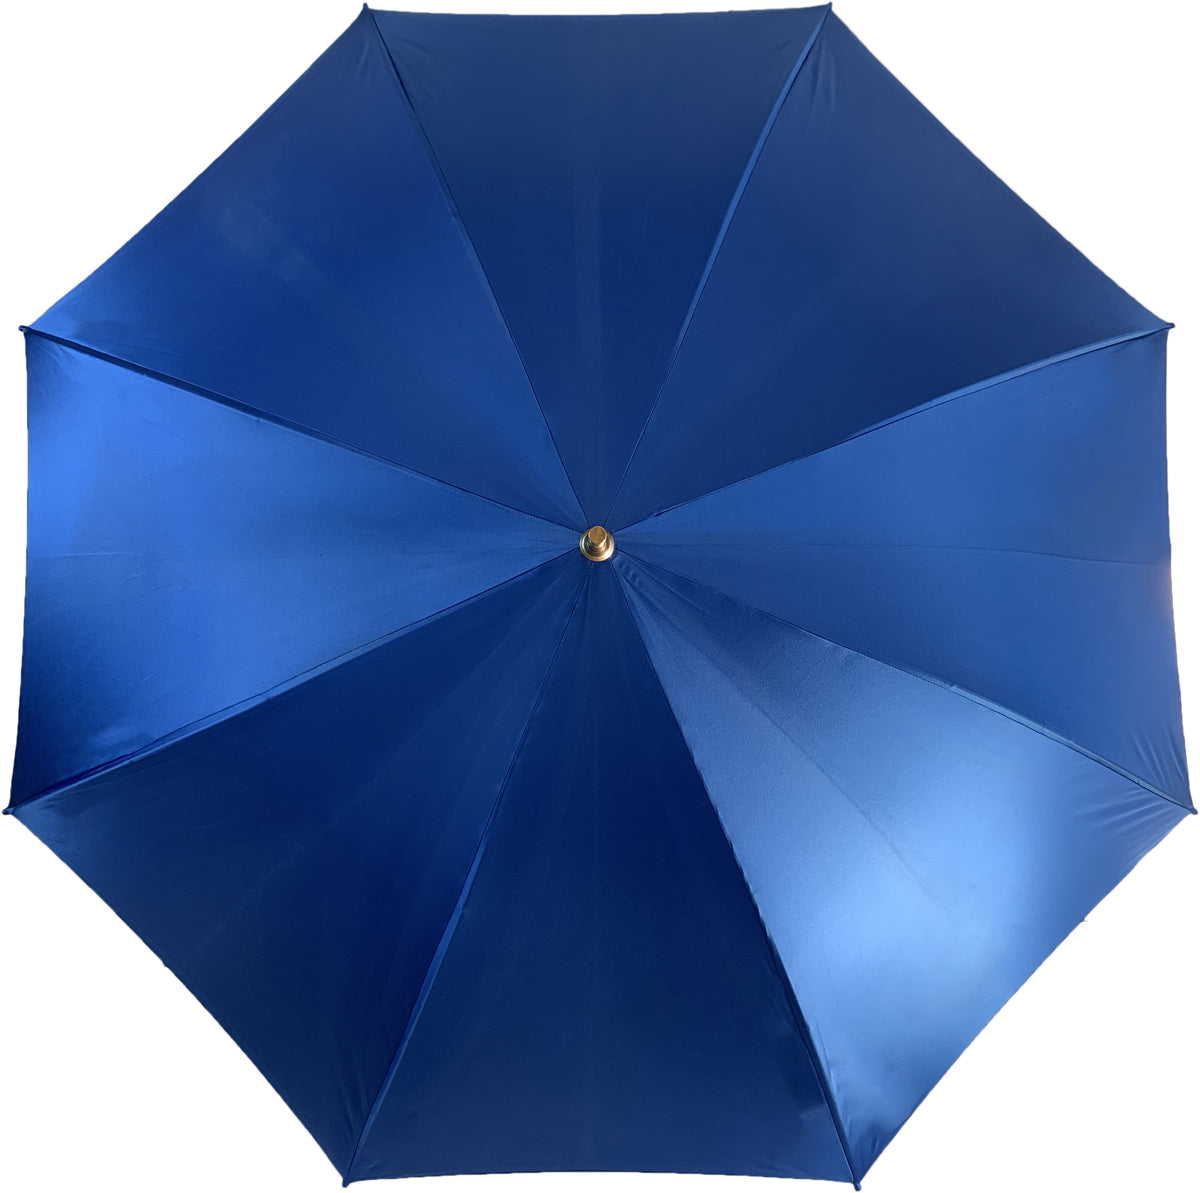 Ladies Double Lined Bright Blue Umbrella with Gold Embellished Handle